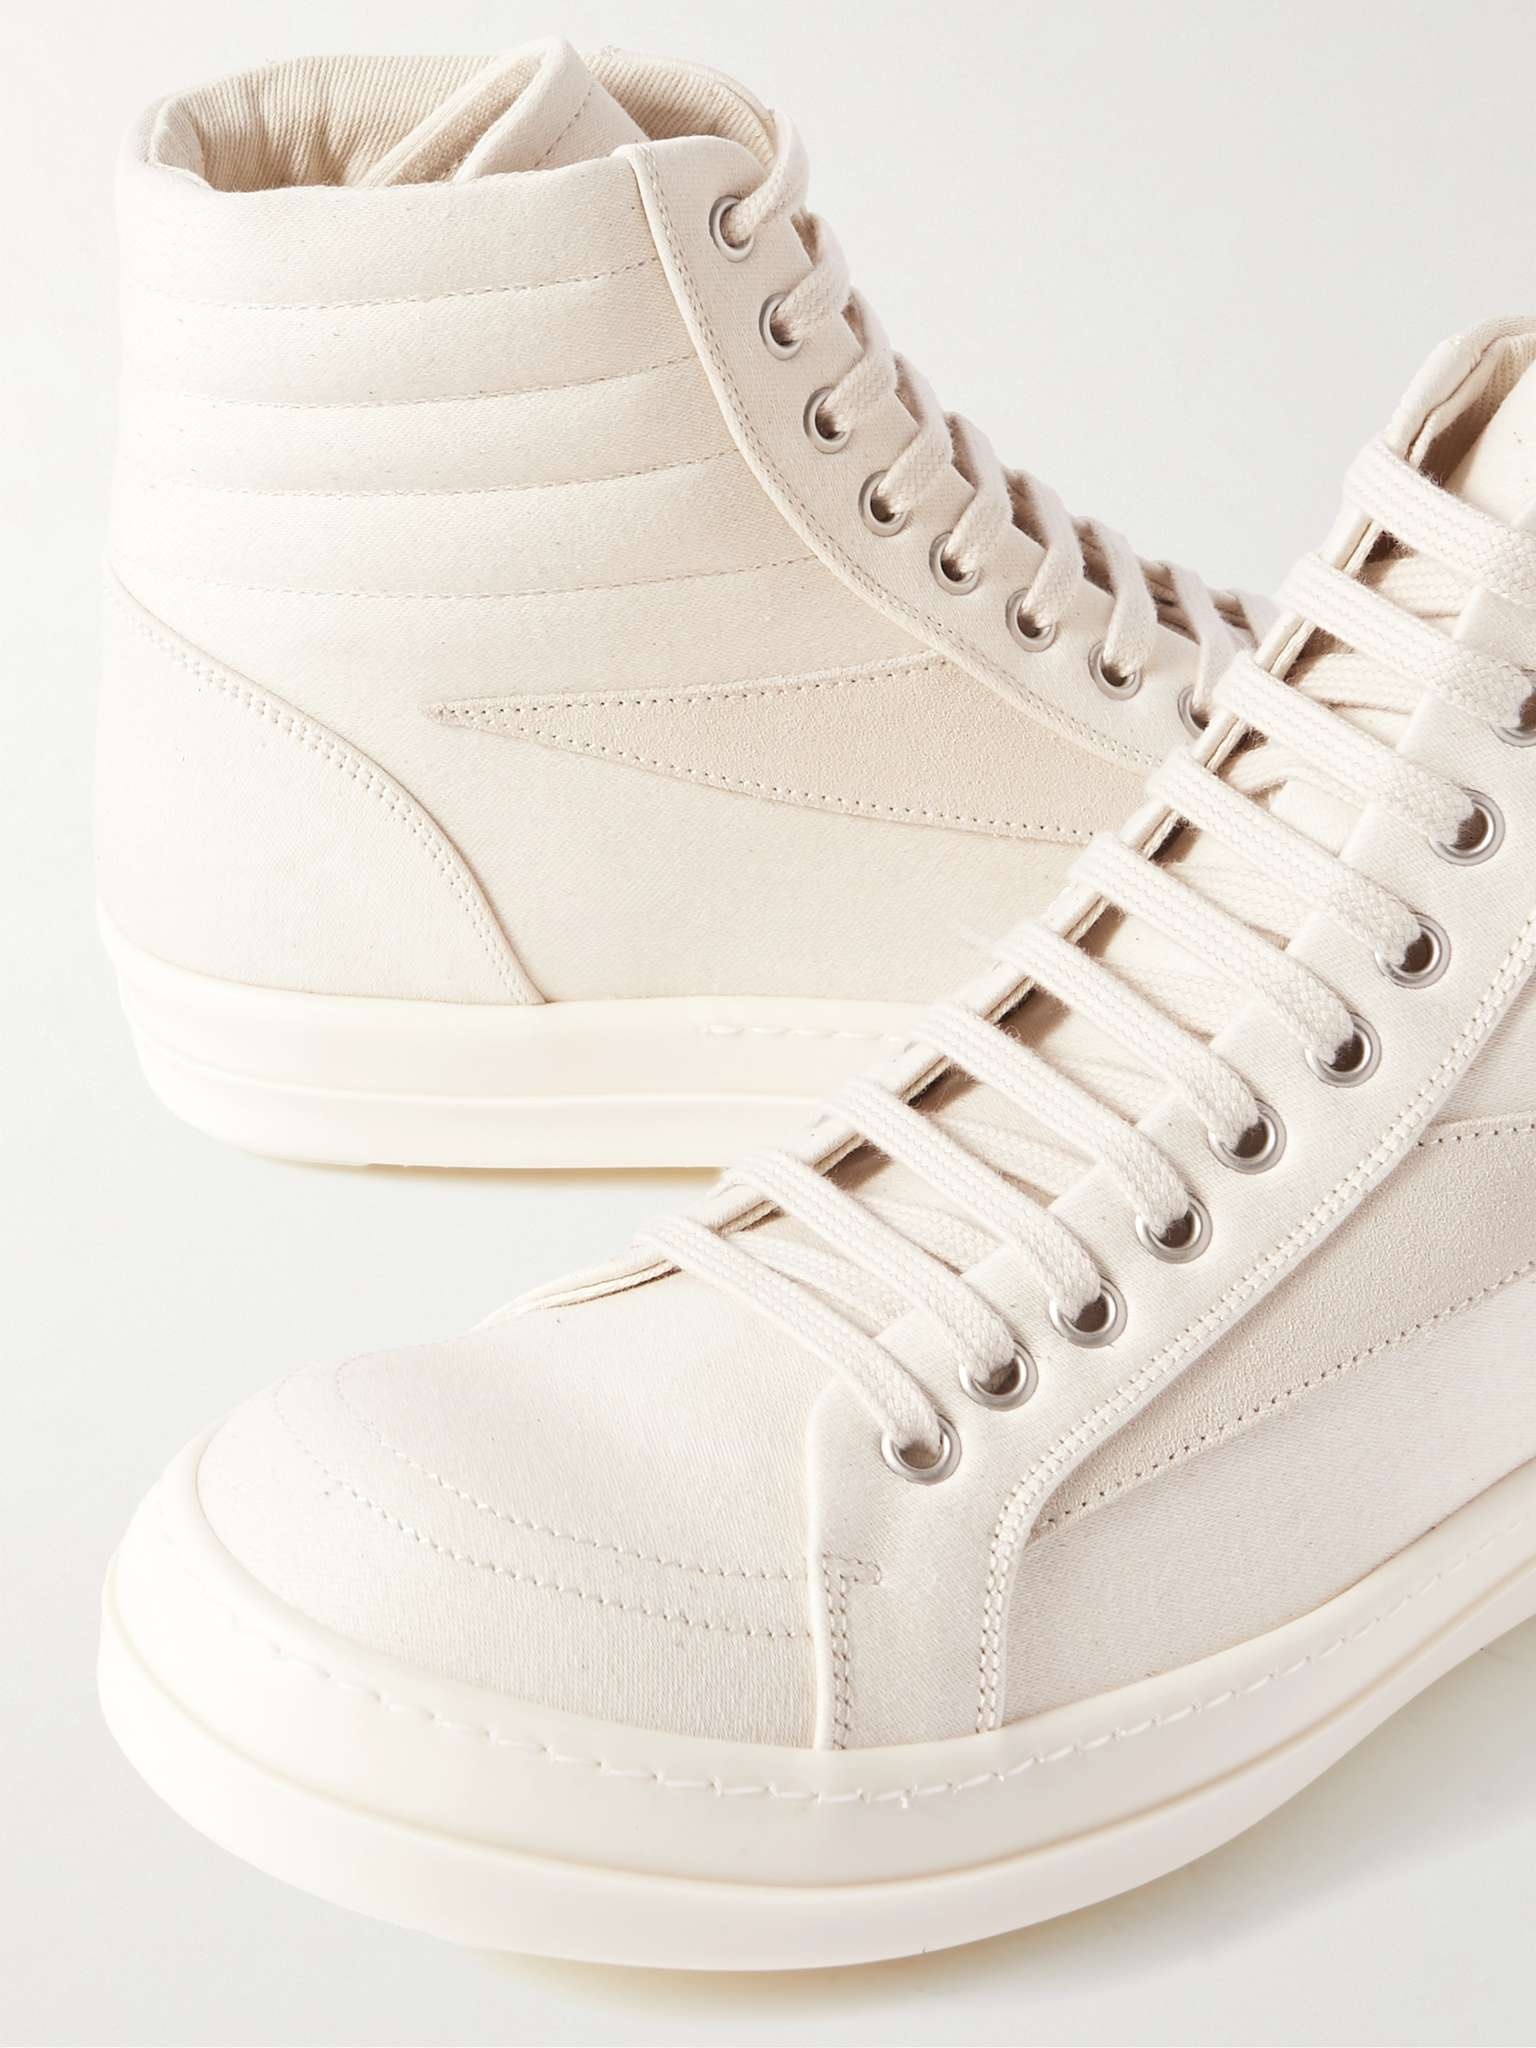 Vintage Suede-Trimmed Canvas High-Top Sneakers - 6